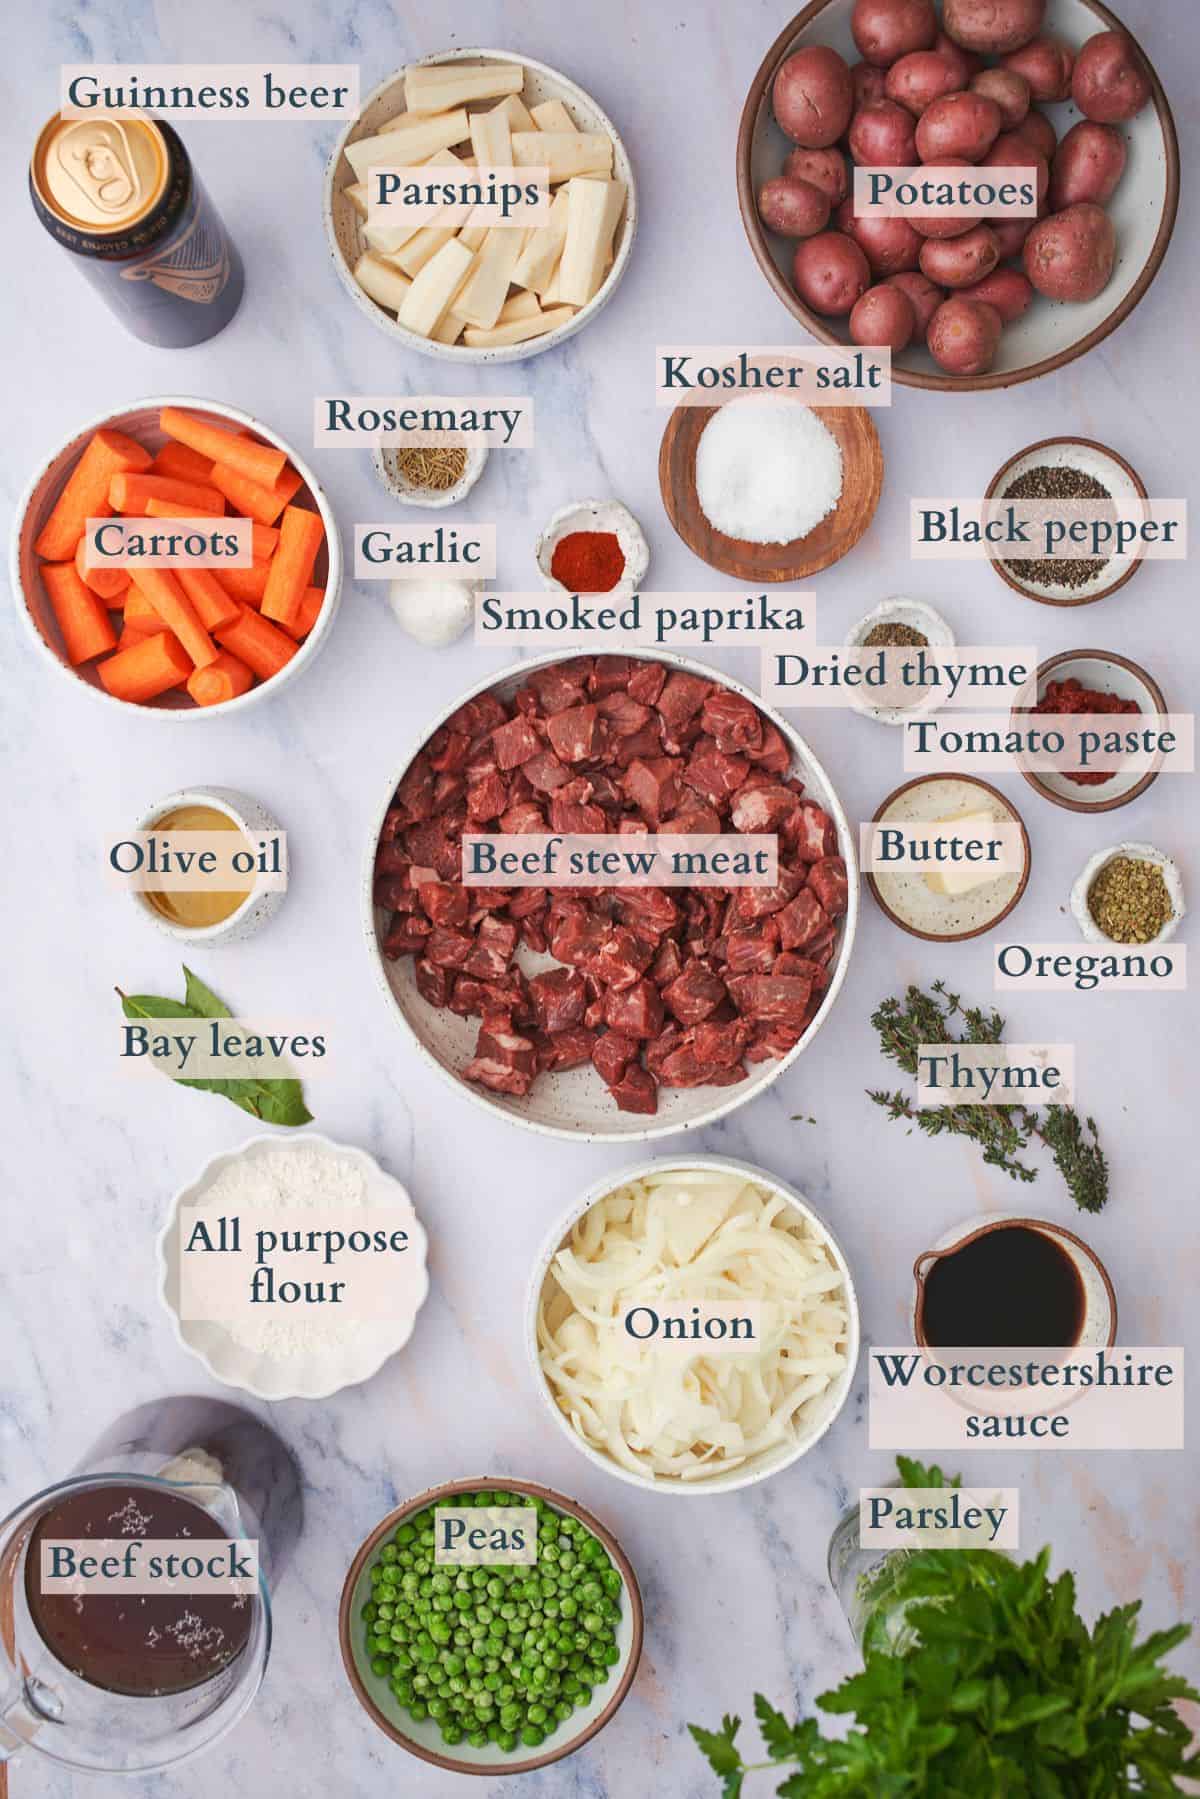 ingredients to make slow cooker irish beef stew laid out on plates and in bowls, labeled to denote each ingredient.